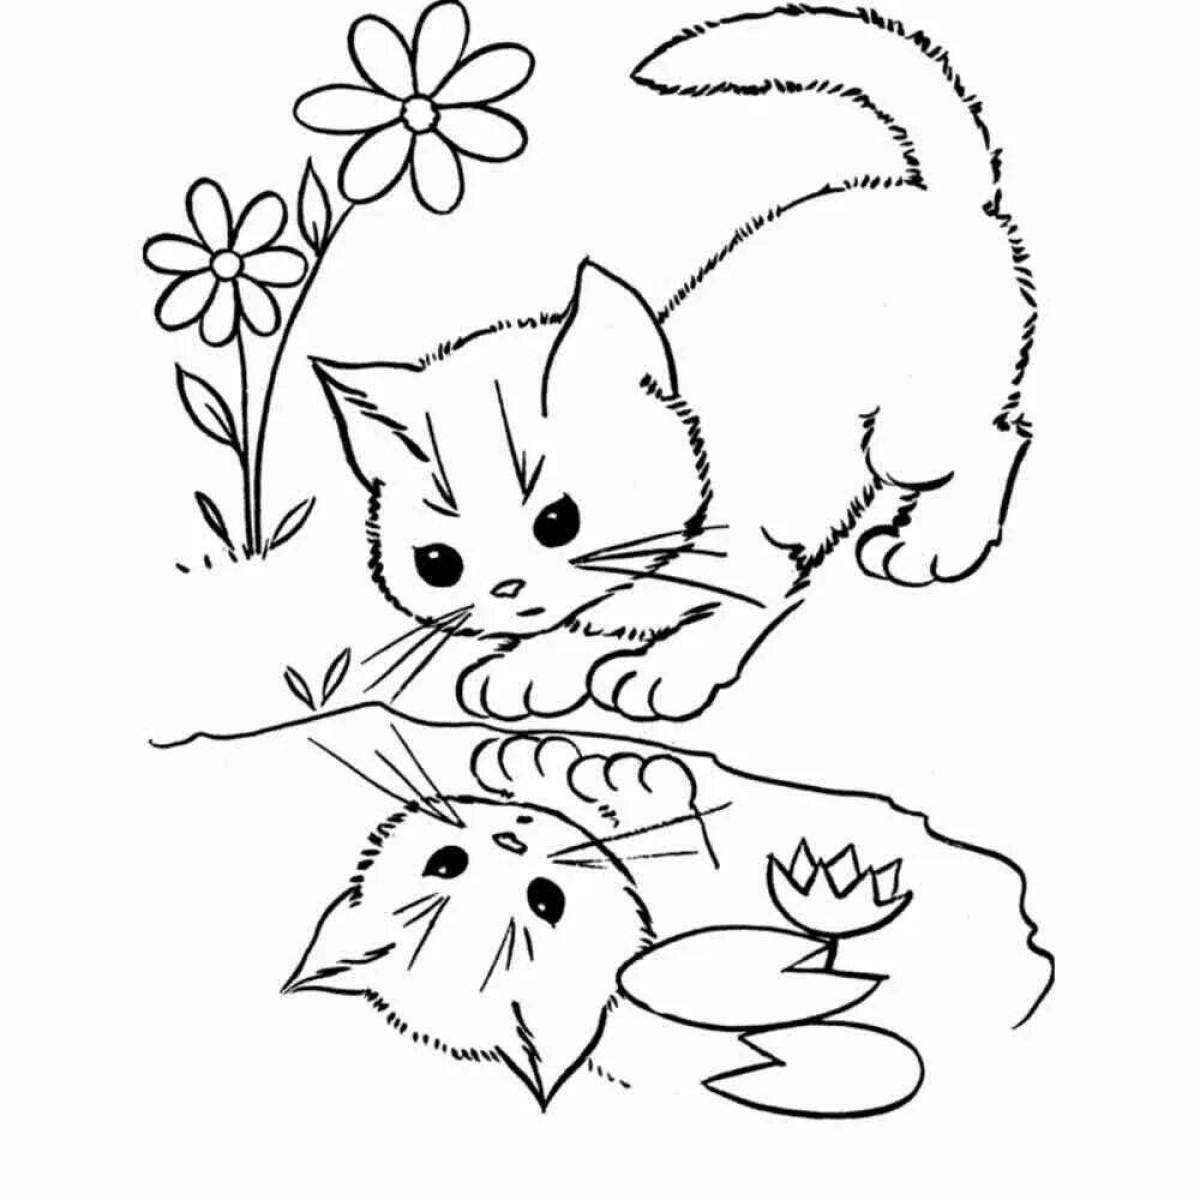 Fluffy coloring book for girls cats and kittens